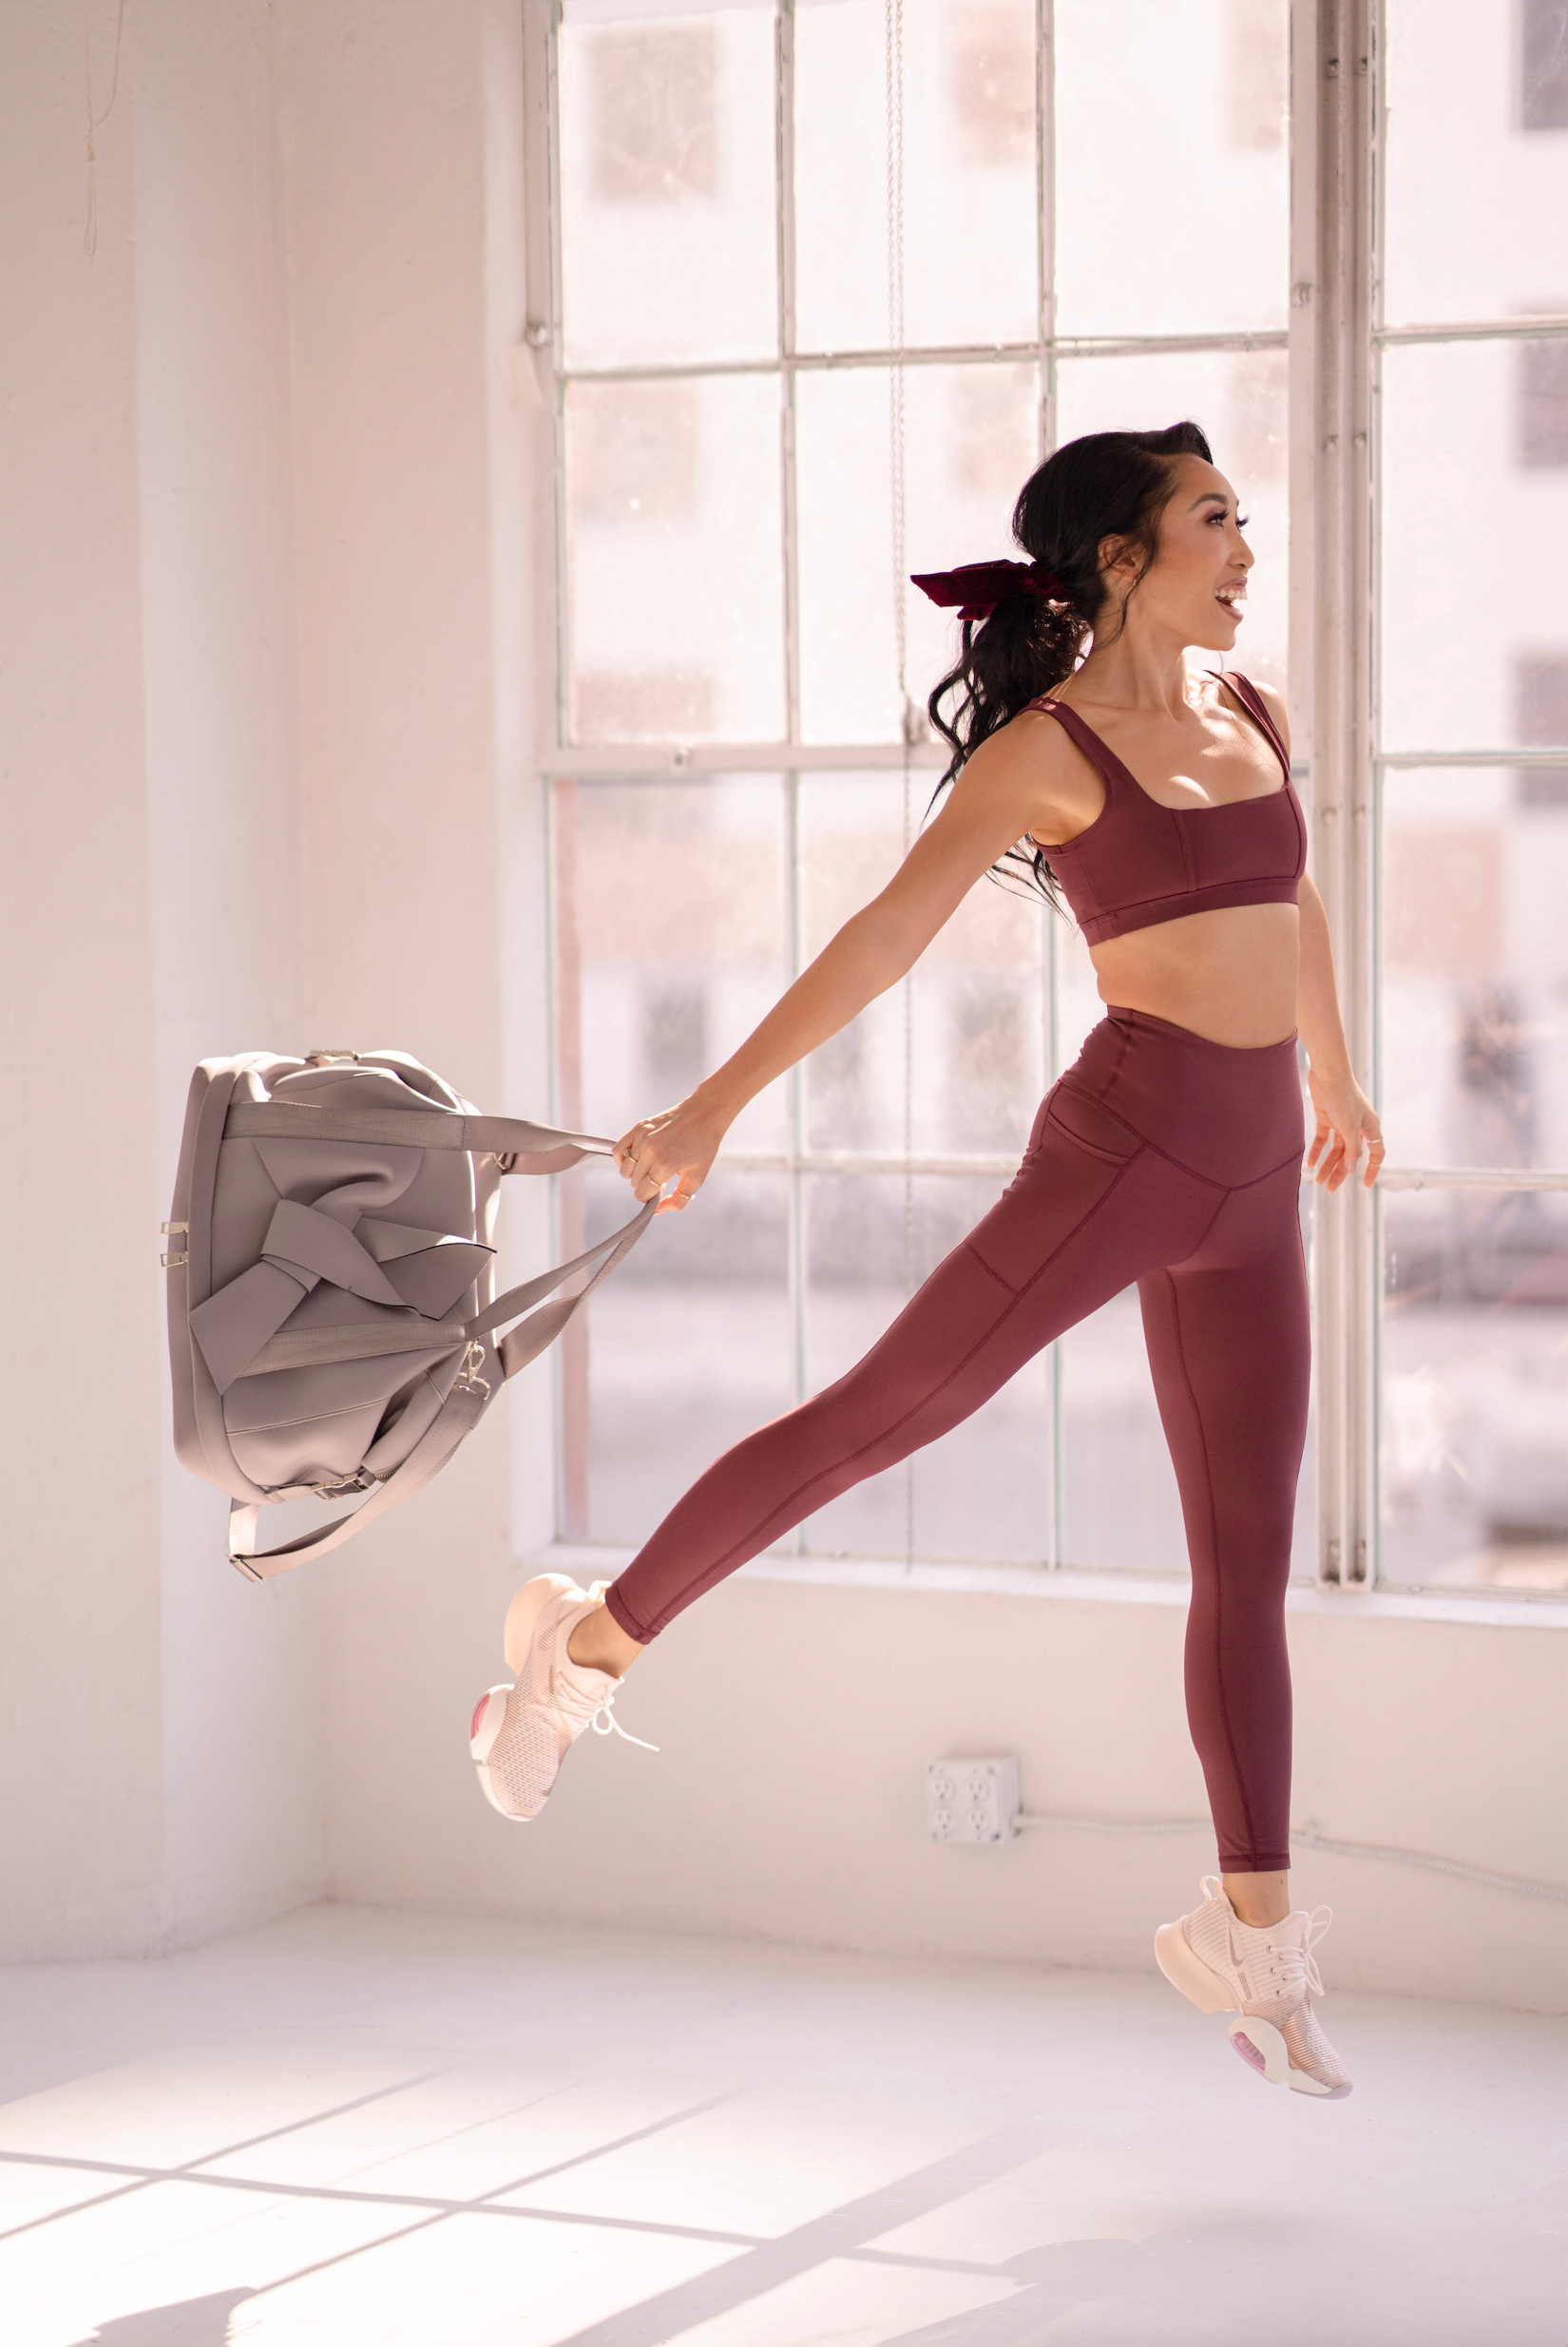 Cassey Ho's Journey From Blogilates on  to DTC Success With POPFLEX  - Shopify